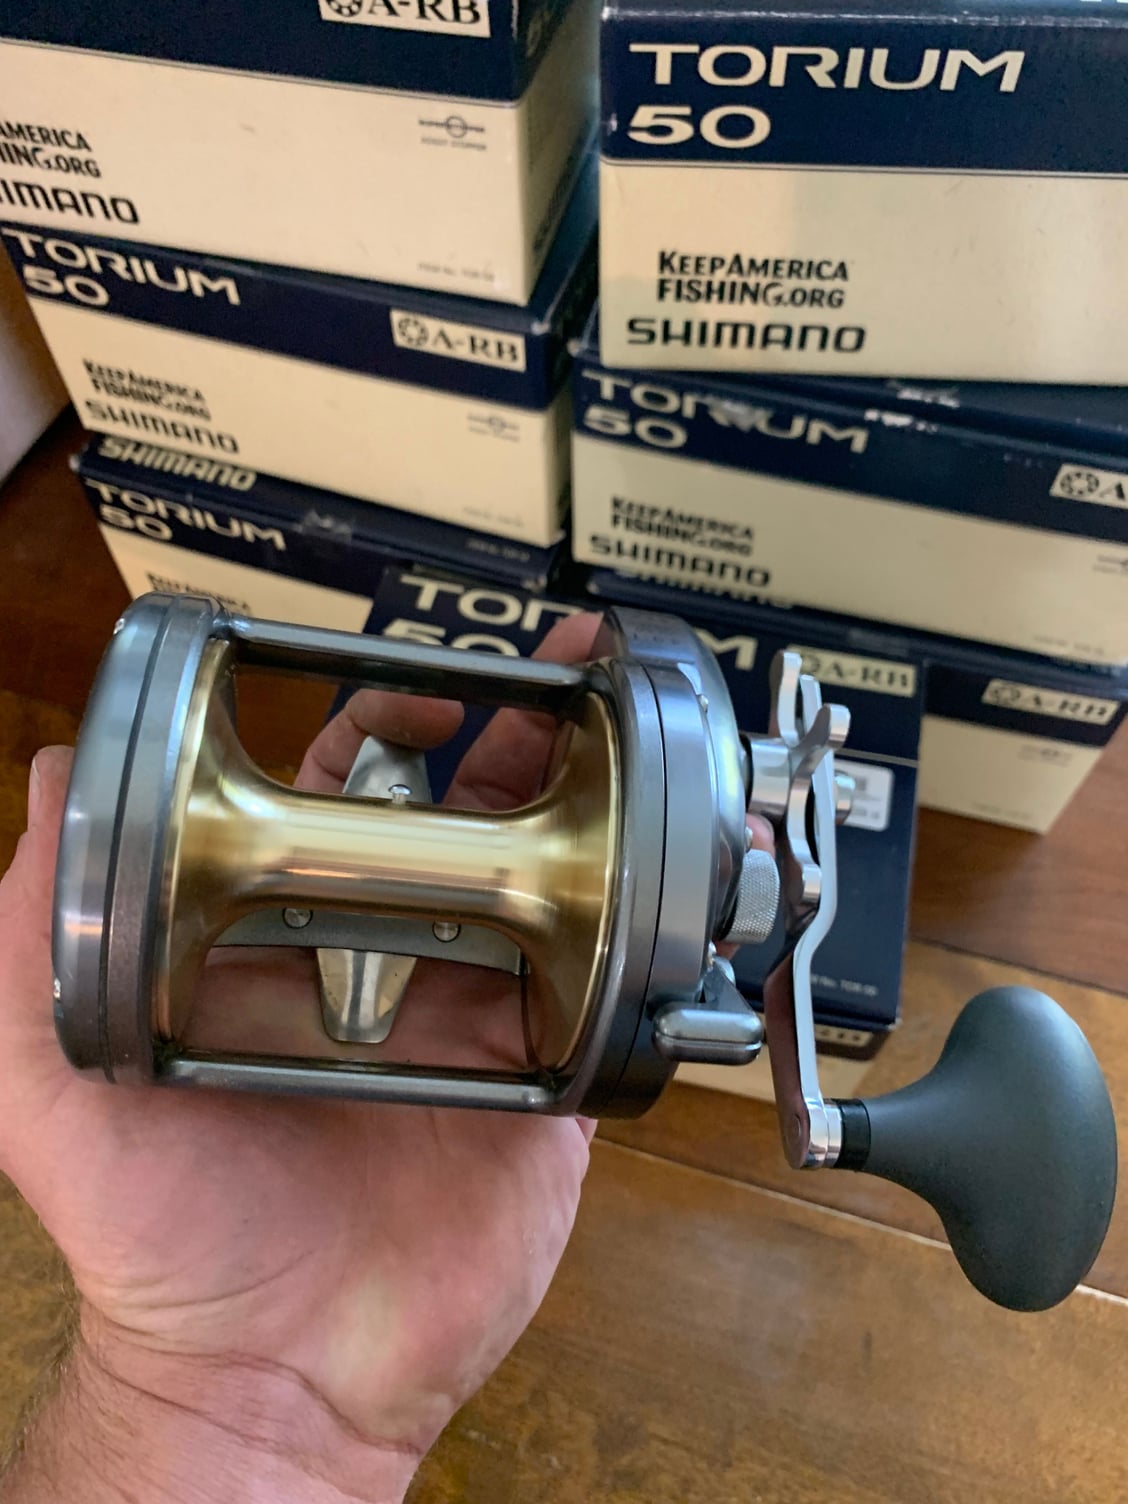 Shimano torium 50 $250 - The Hull Truth - Boating and Fishing Forum